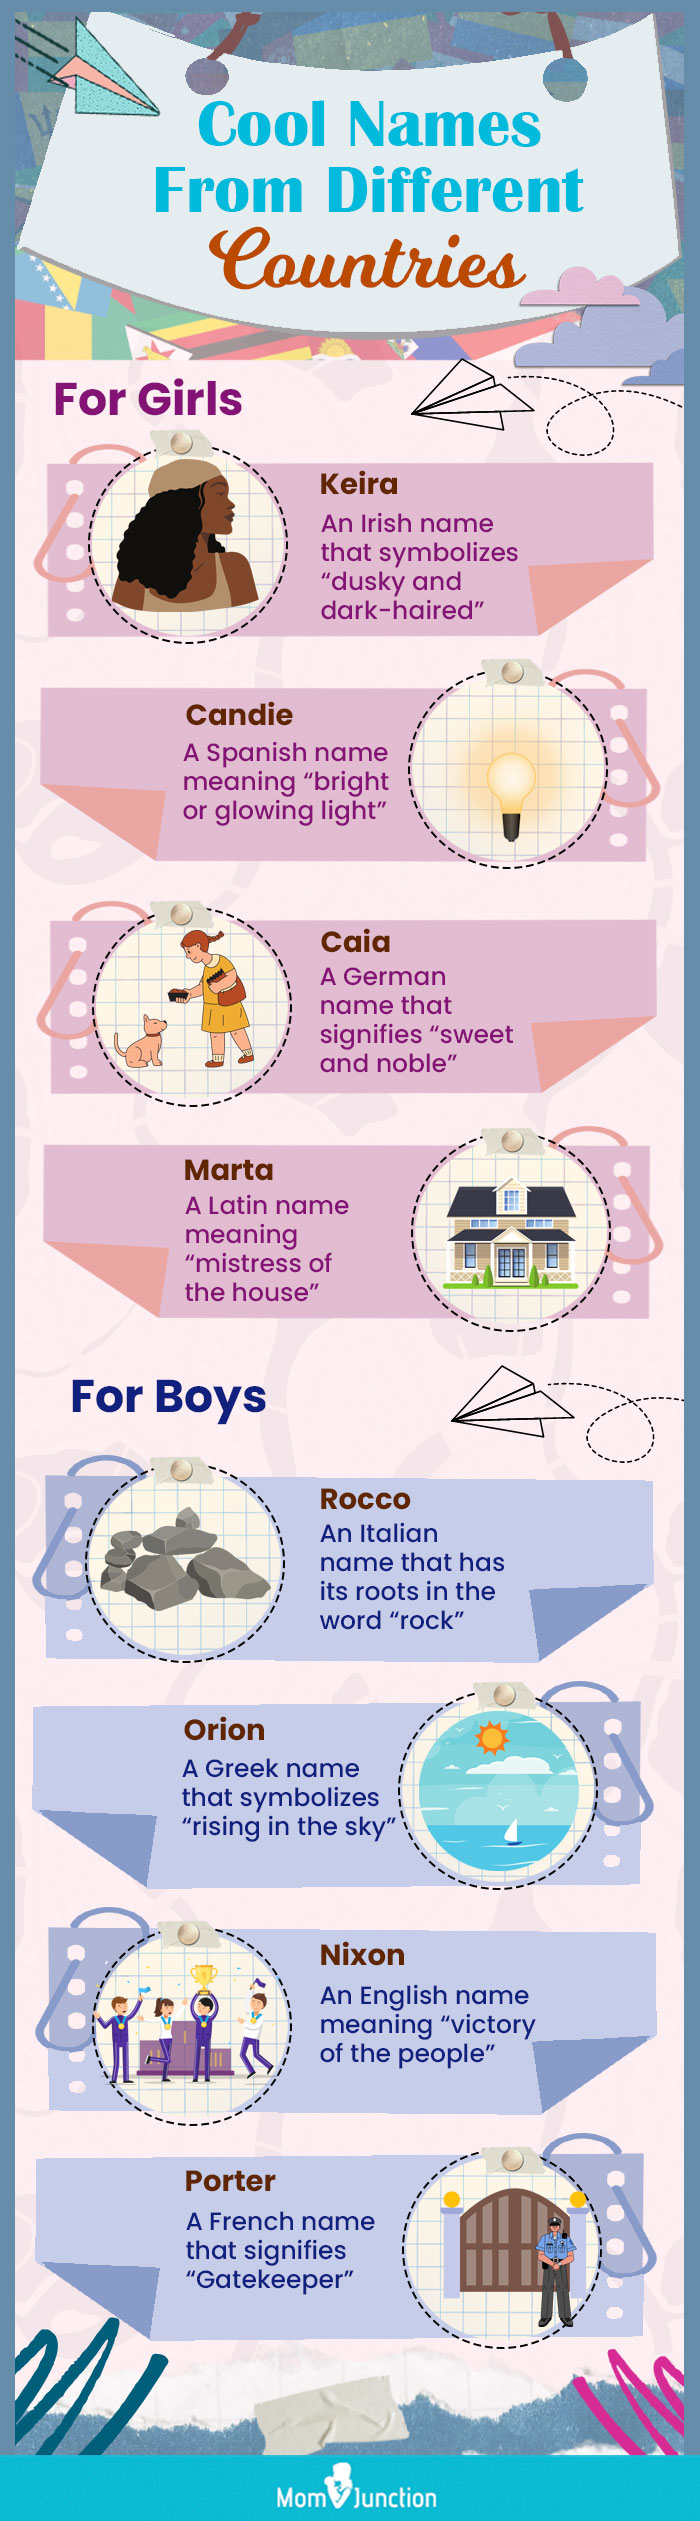 cool names from different countries [infographic]